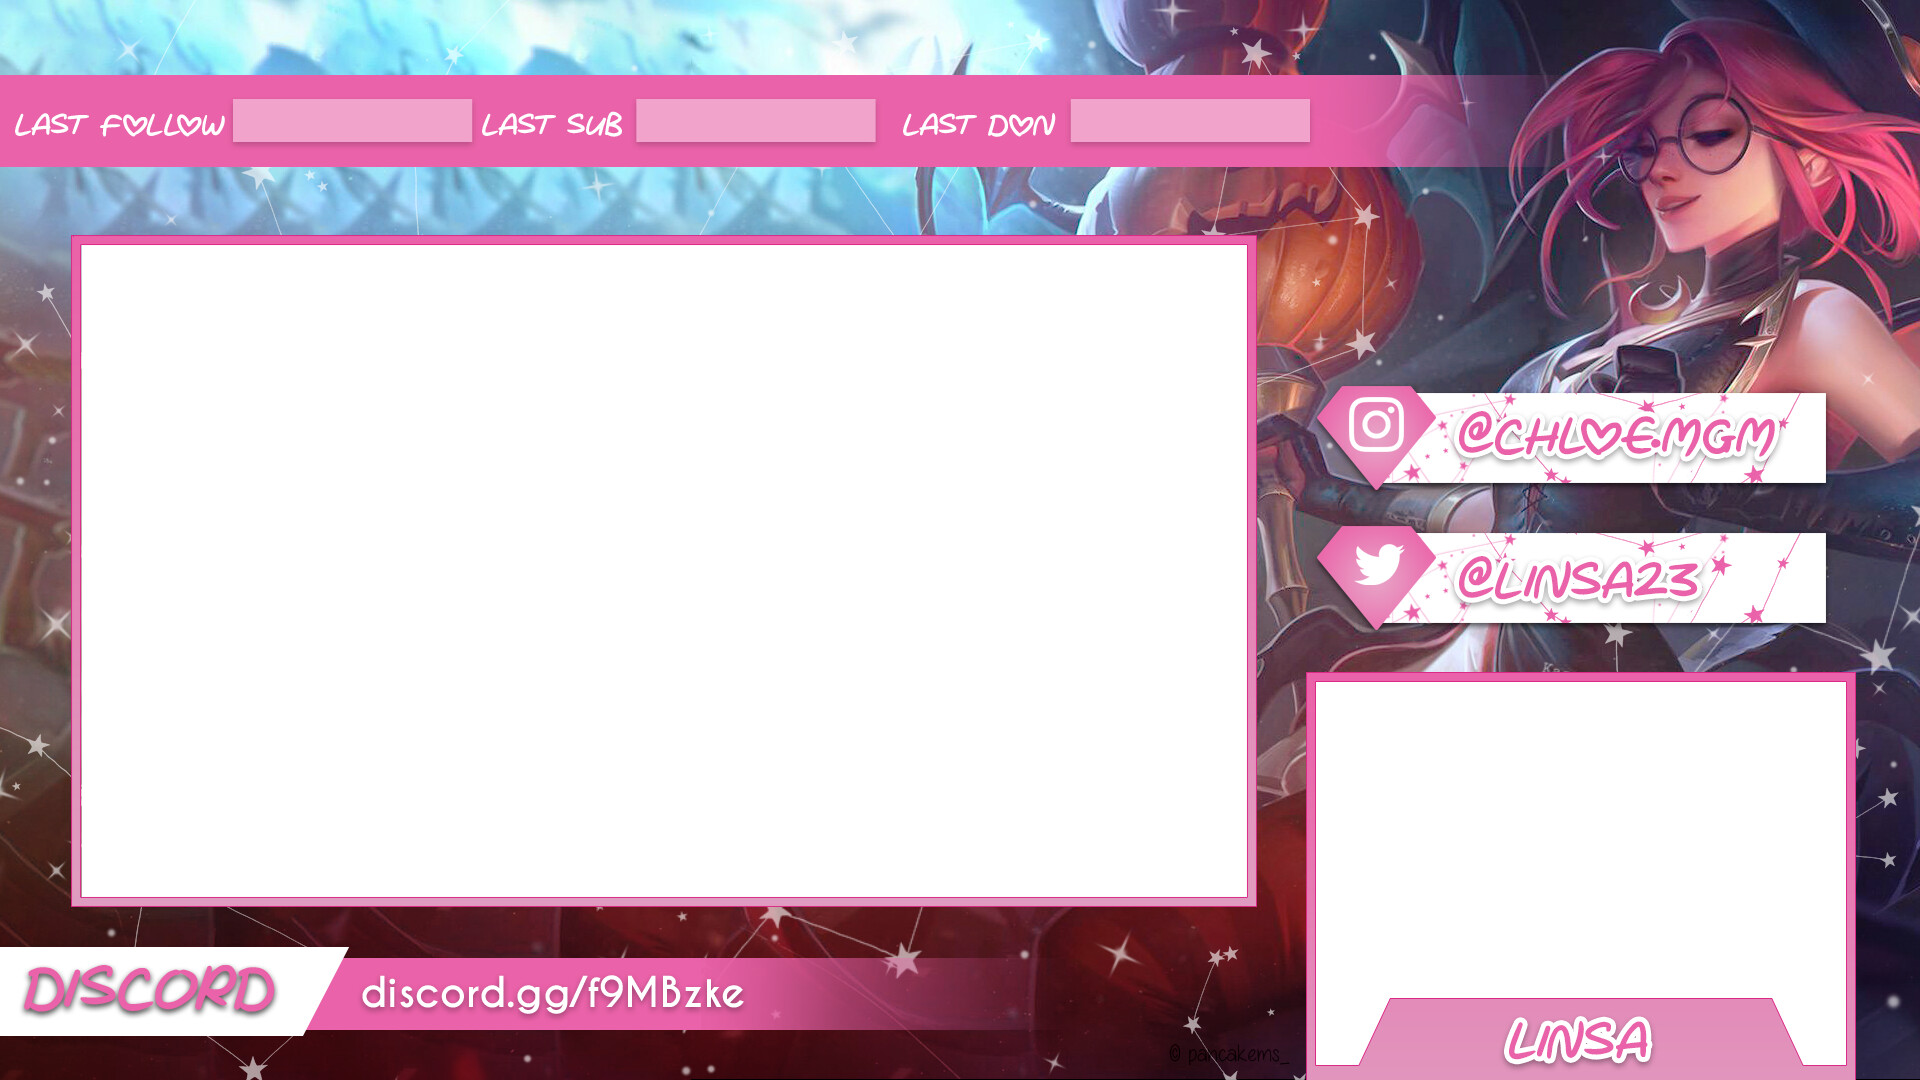 Twitch League of Legends Overlay - JUST CHATTING by Alenarya on